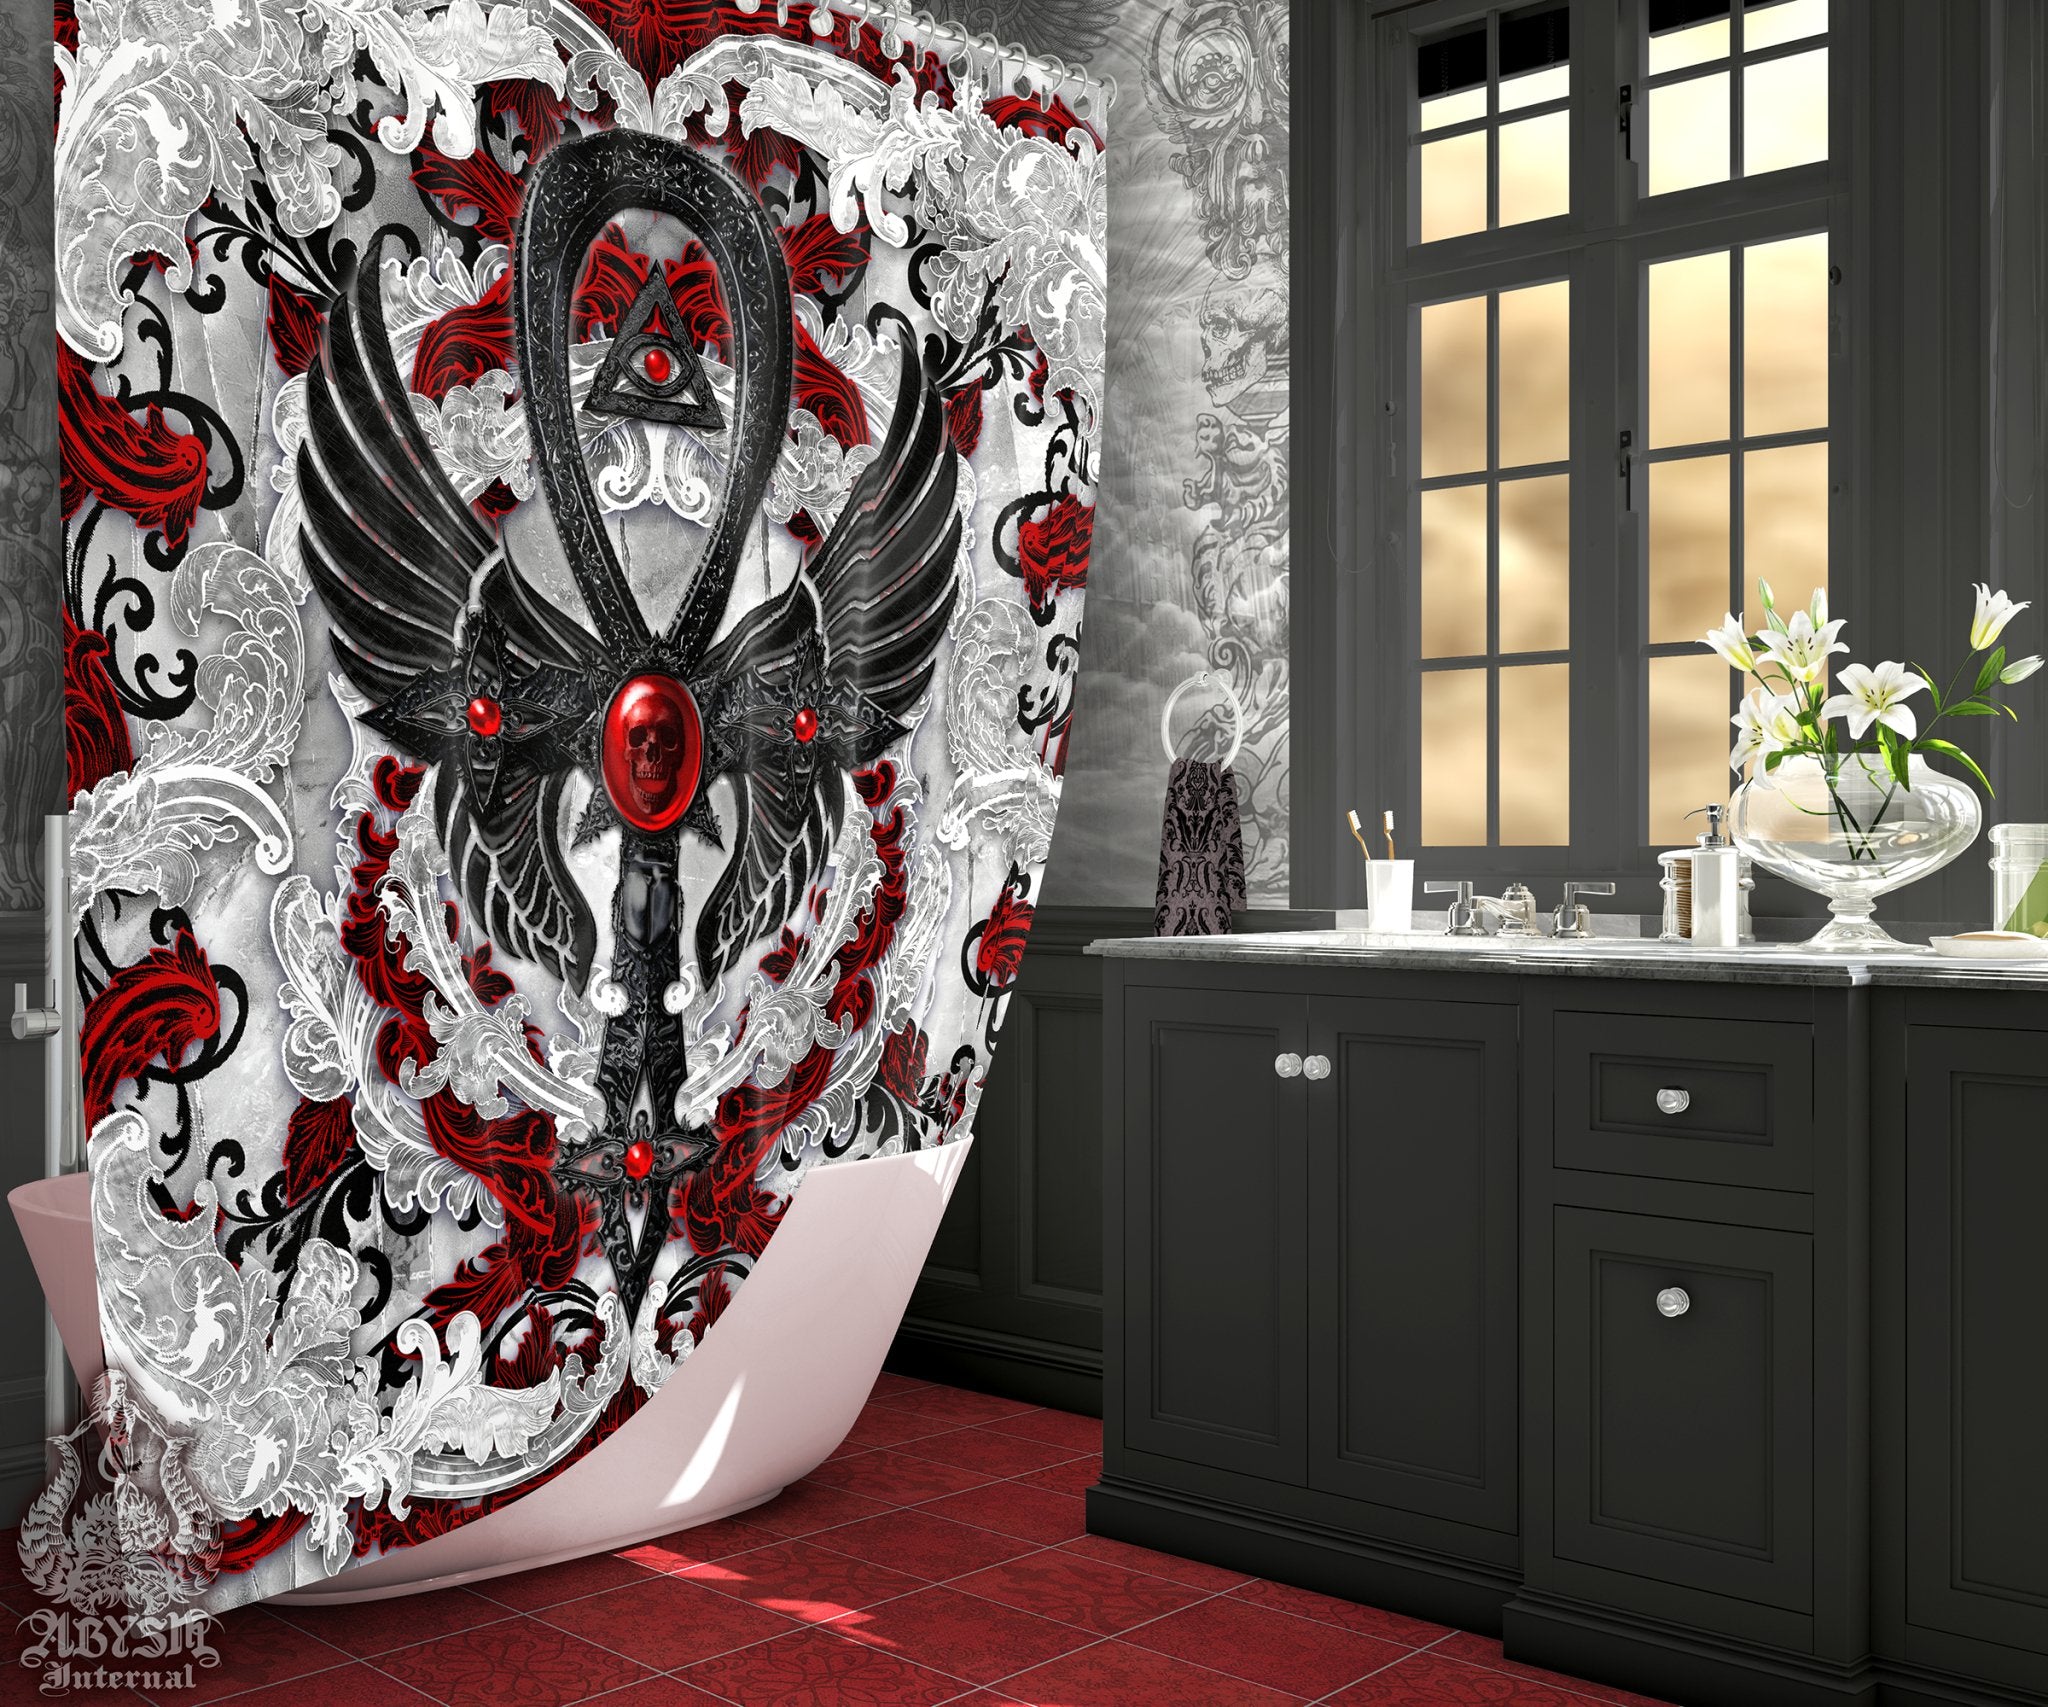 Bloody White Goth Ankh Shower Curtain, 71x74 inches, Gothic Bathroom Decor, Occult - Ornamented, Red, Black, 3 Colors - Abysm Internal